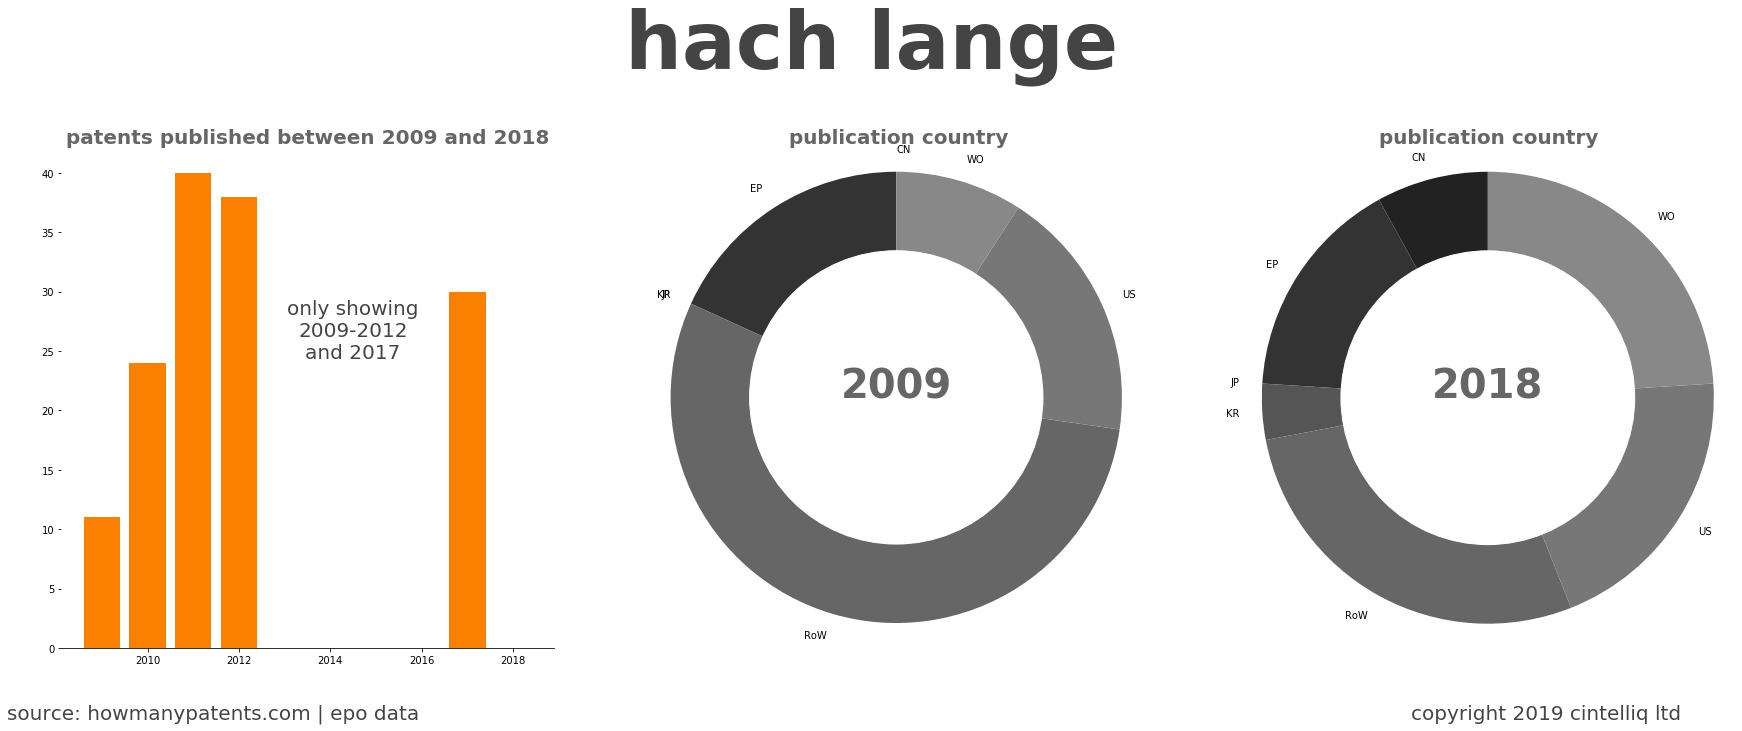 summary of patents for Hach Lange